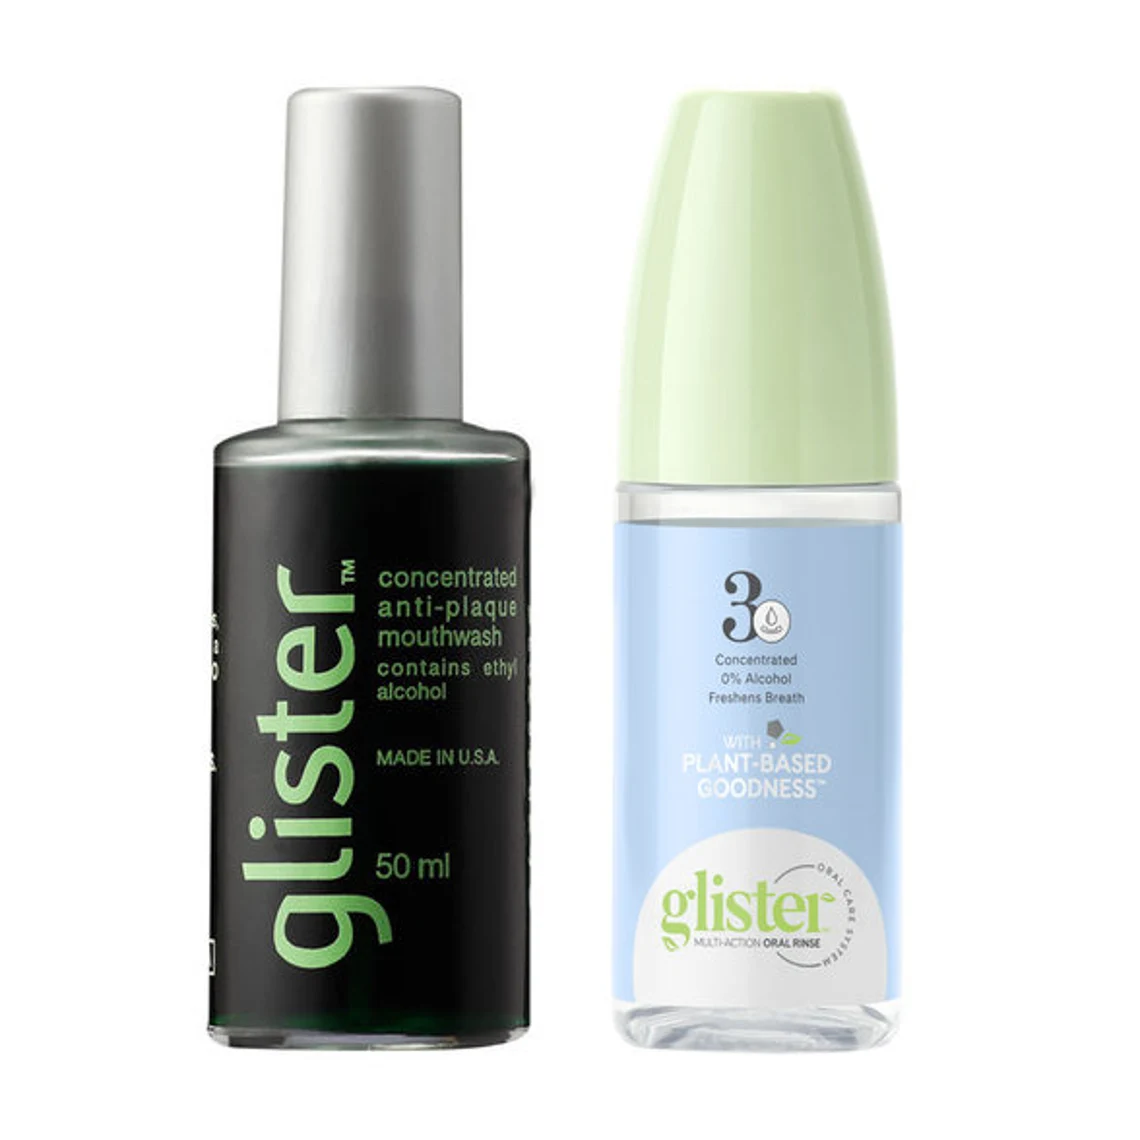 2 Bottles Amway GLISTER Concentrated Anti-Plaque Mouthwash 50ml DHL EXPRESS - $99.90